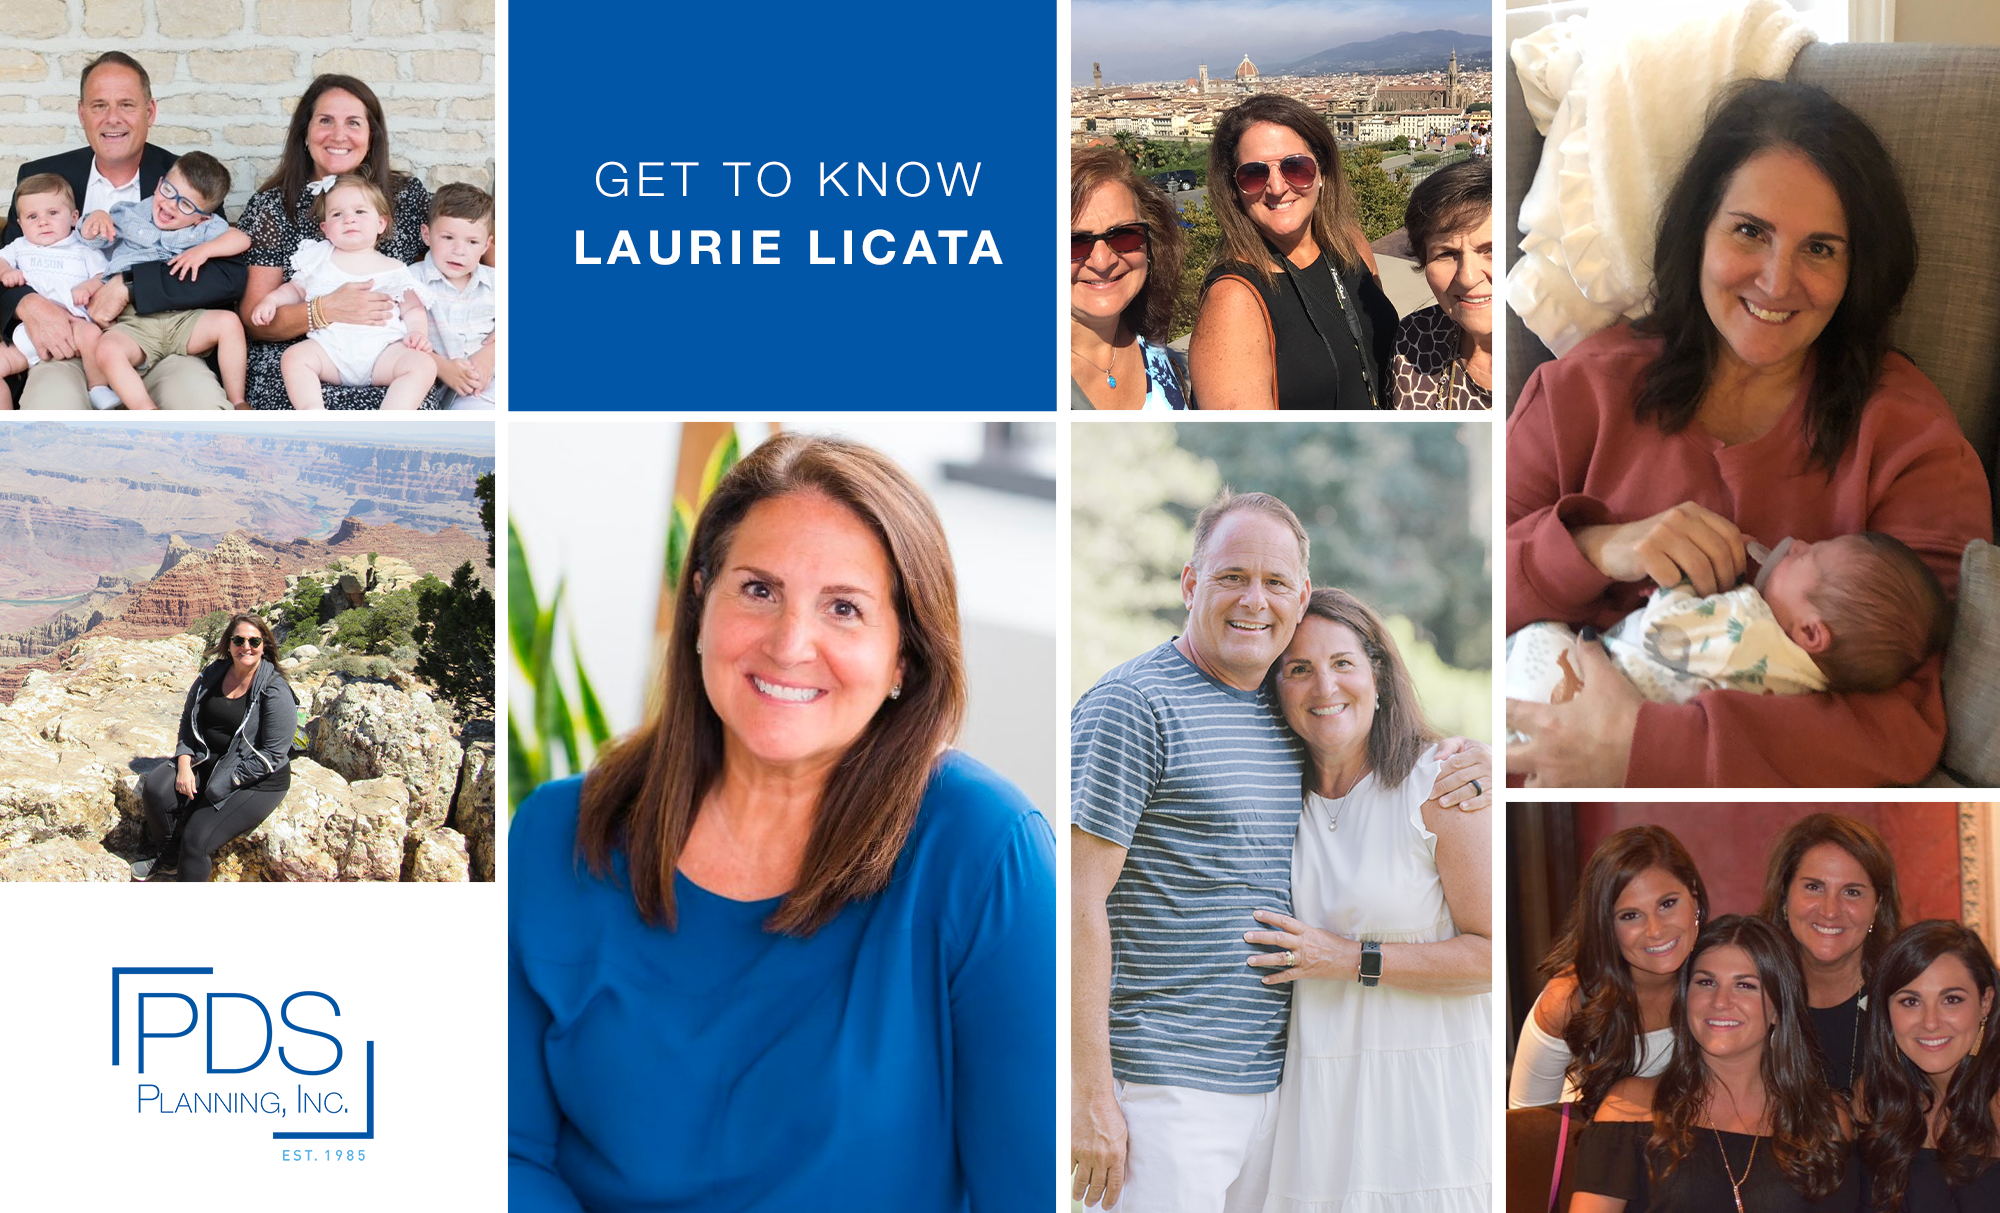 PDS Planning Wealth Planner and Certified Financial Planner Laurie Licata